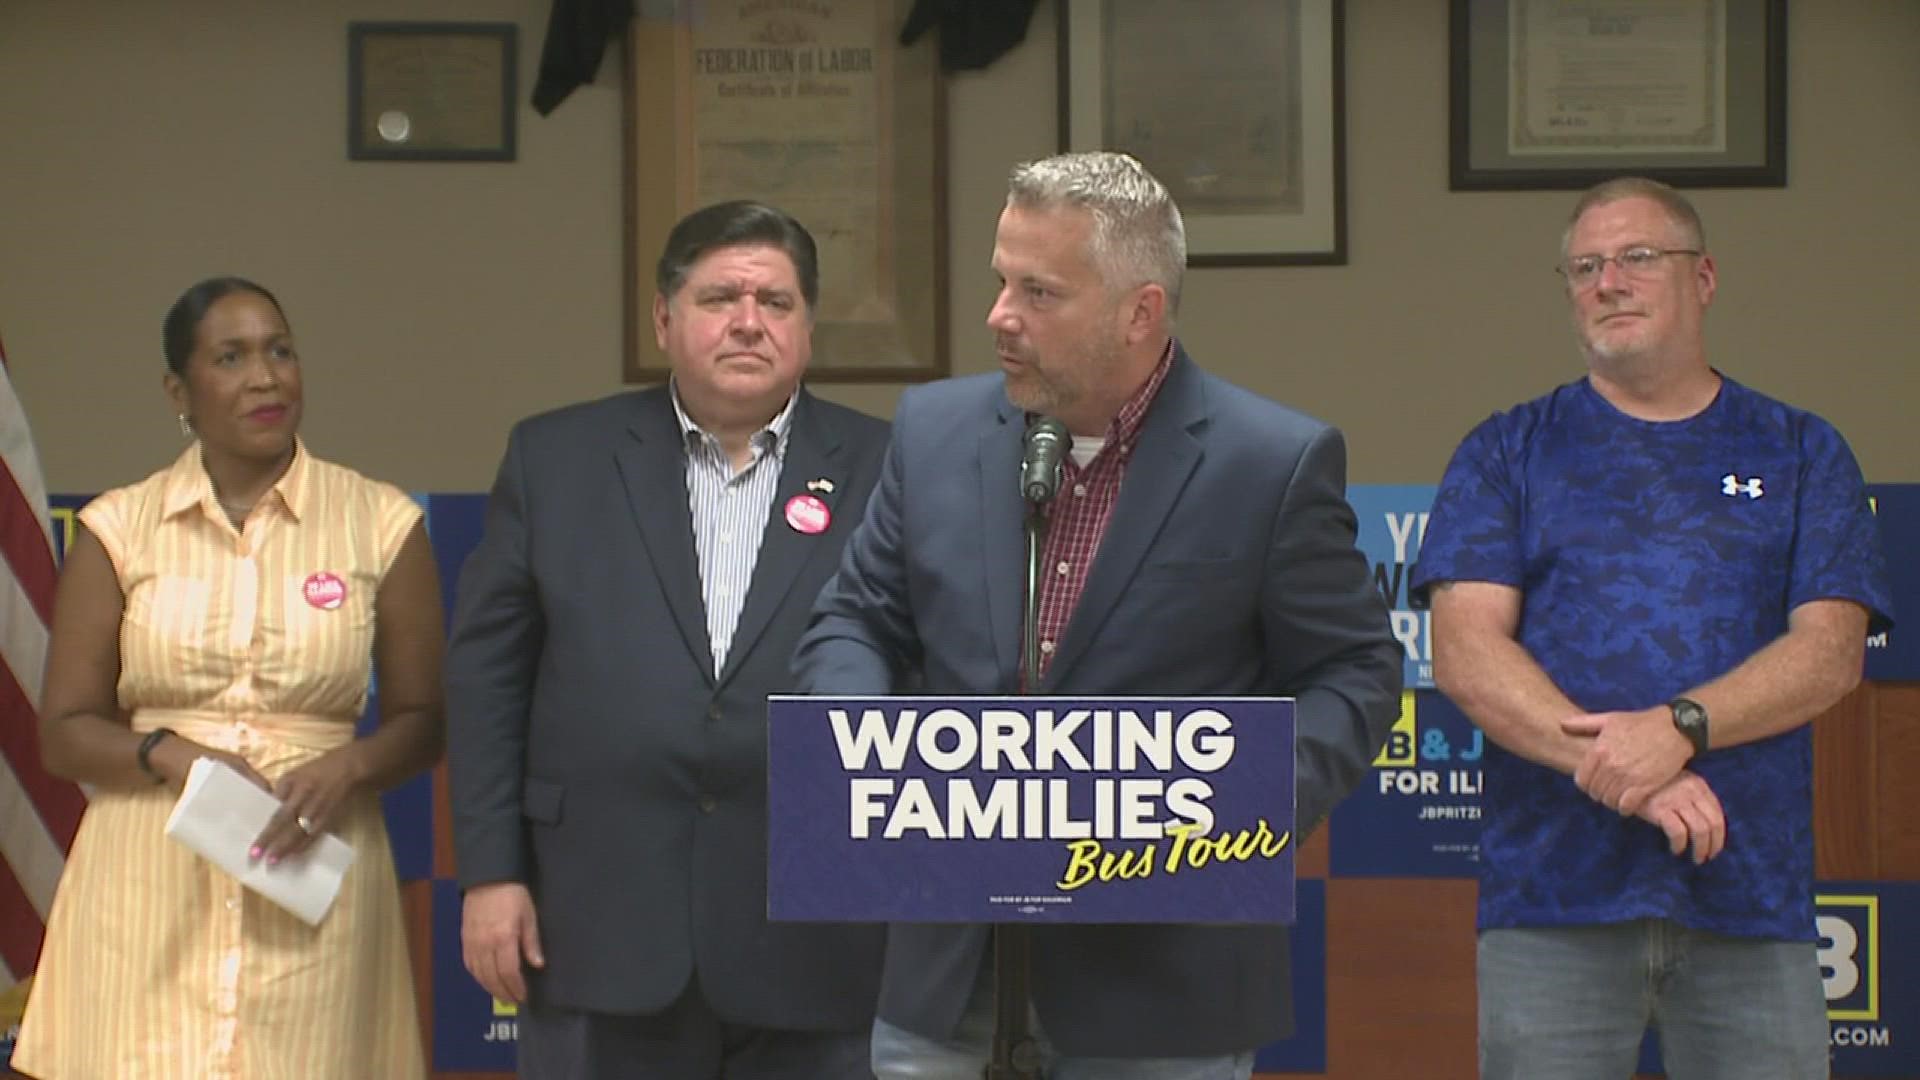 With midterm elections approaching, the Illinois governor stopped by Rock Island to support local U.S. Congress candidate Eric Sorensen and other Democrats.